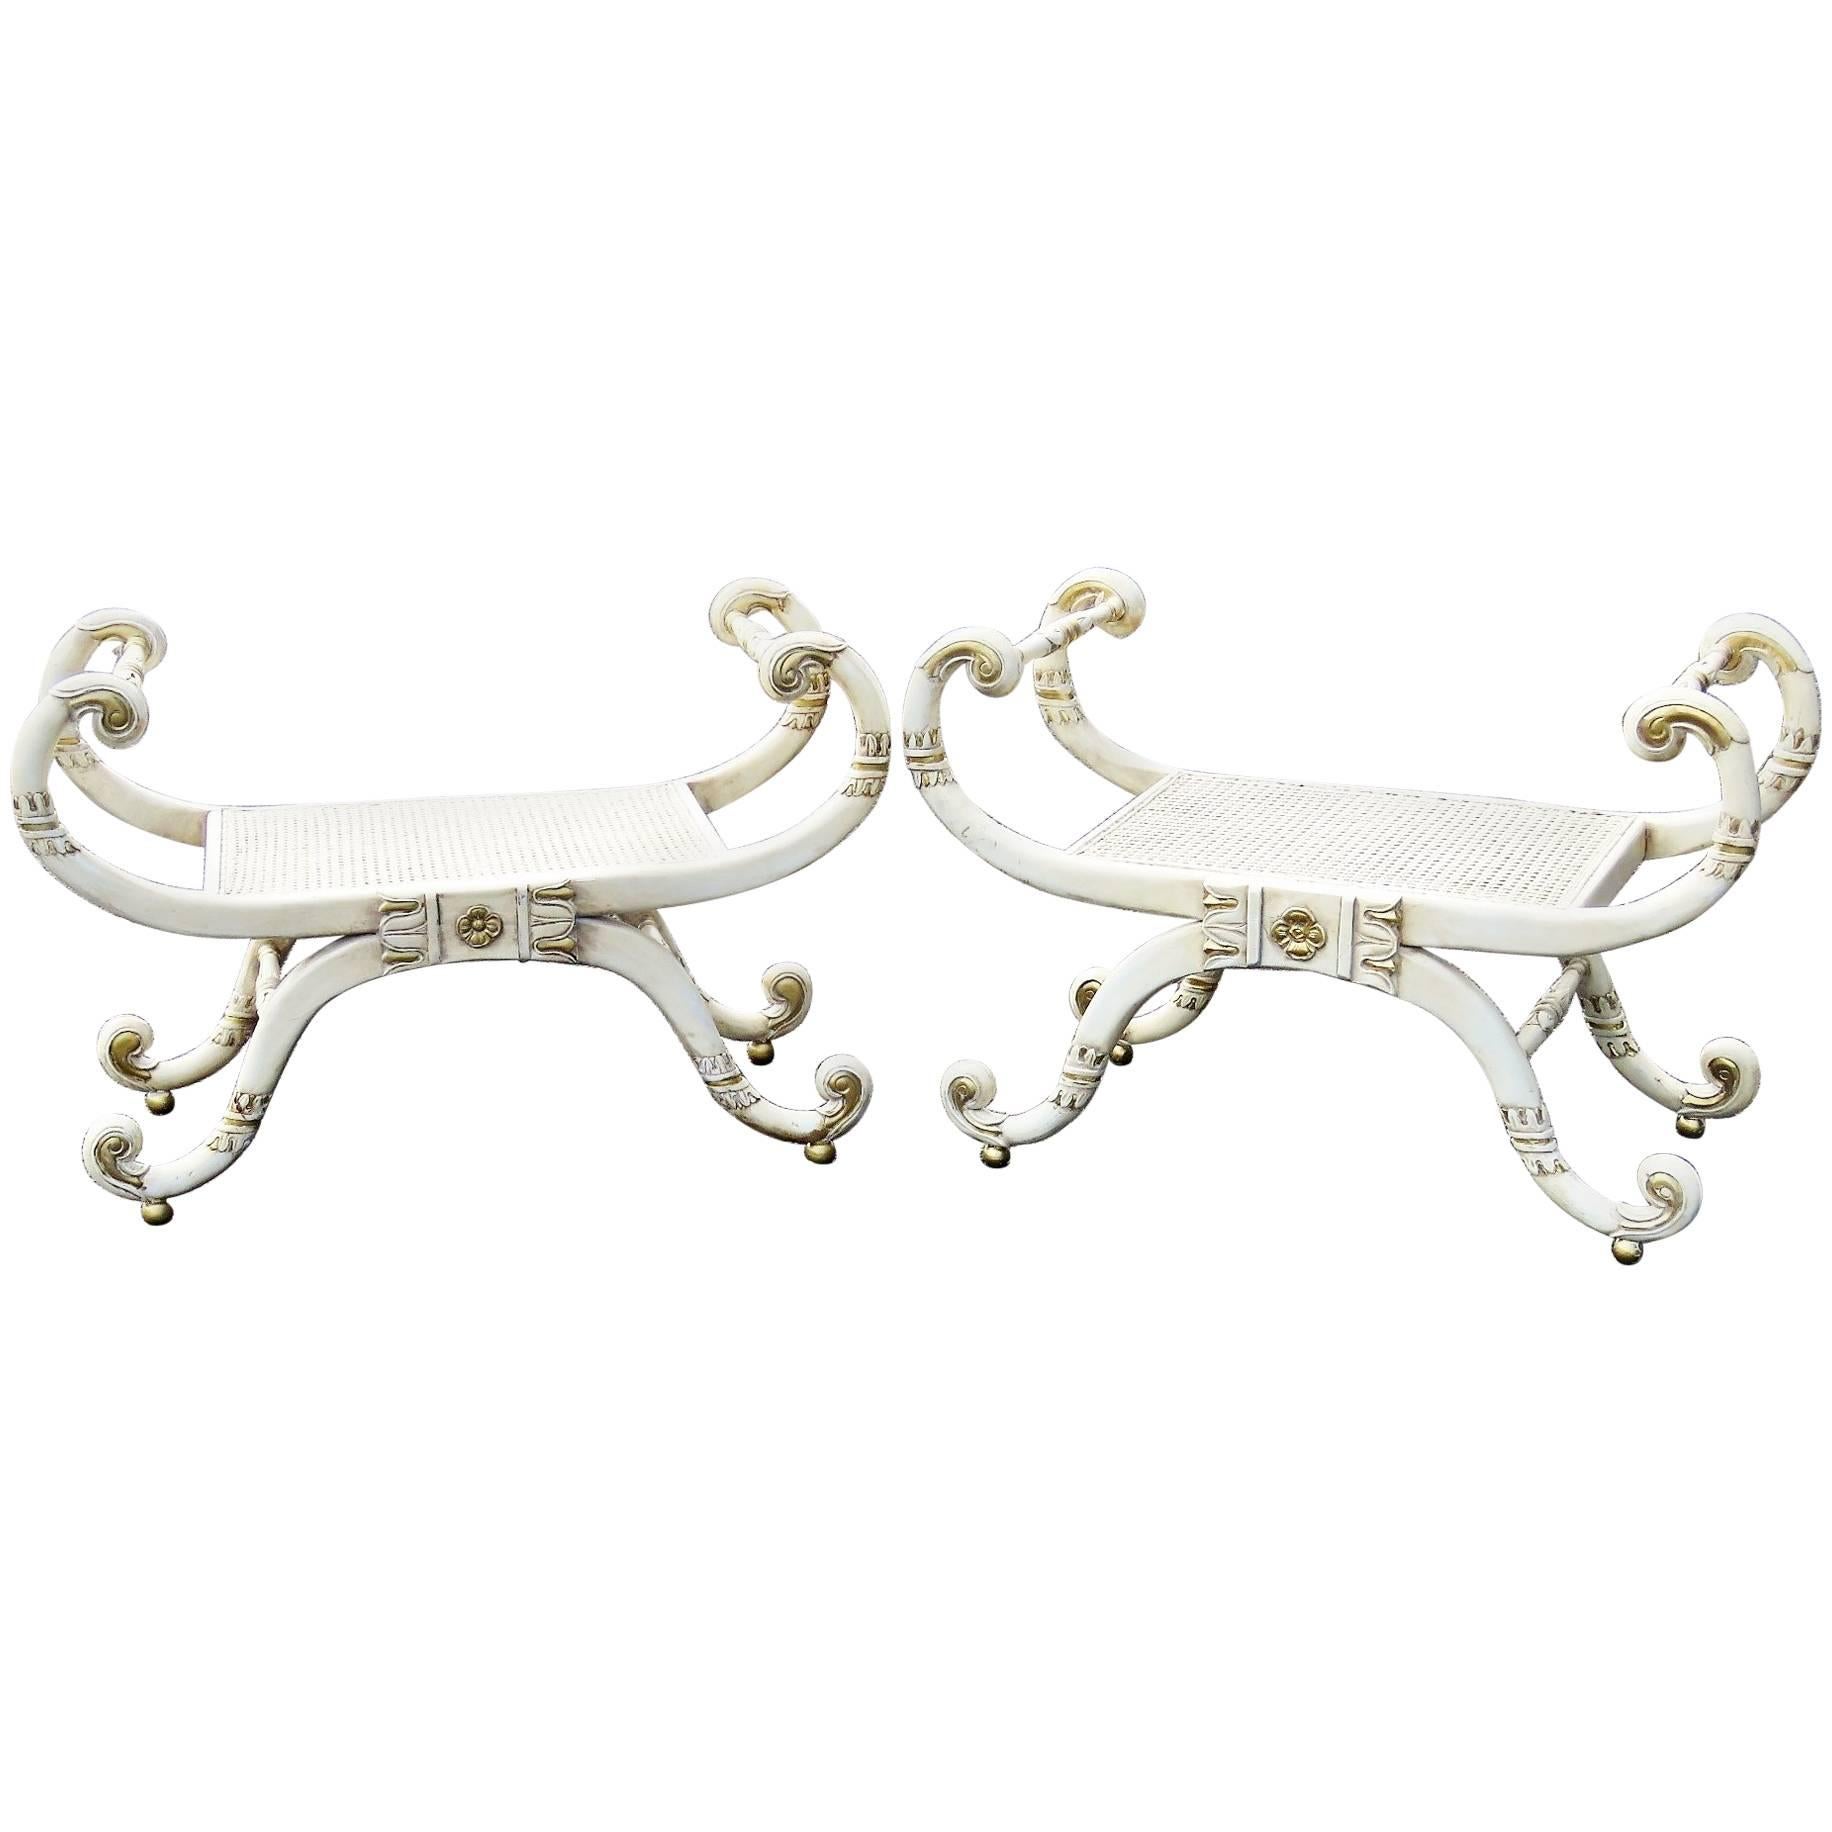 Pair of Distressed Cream and Gilt Painted Caned Seat Cerule Benches